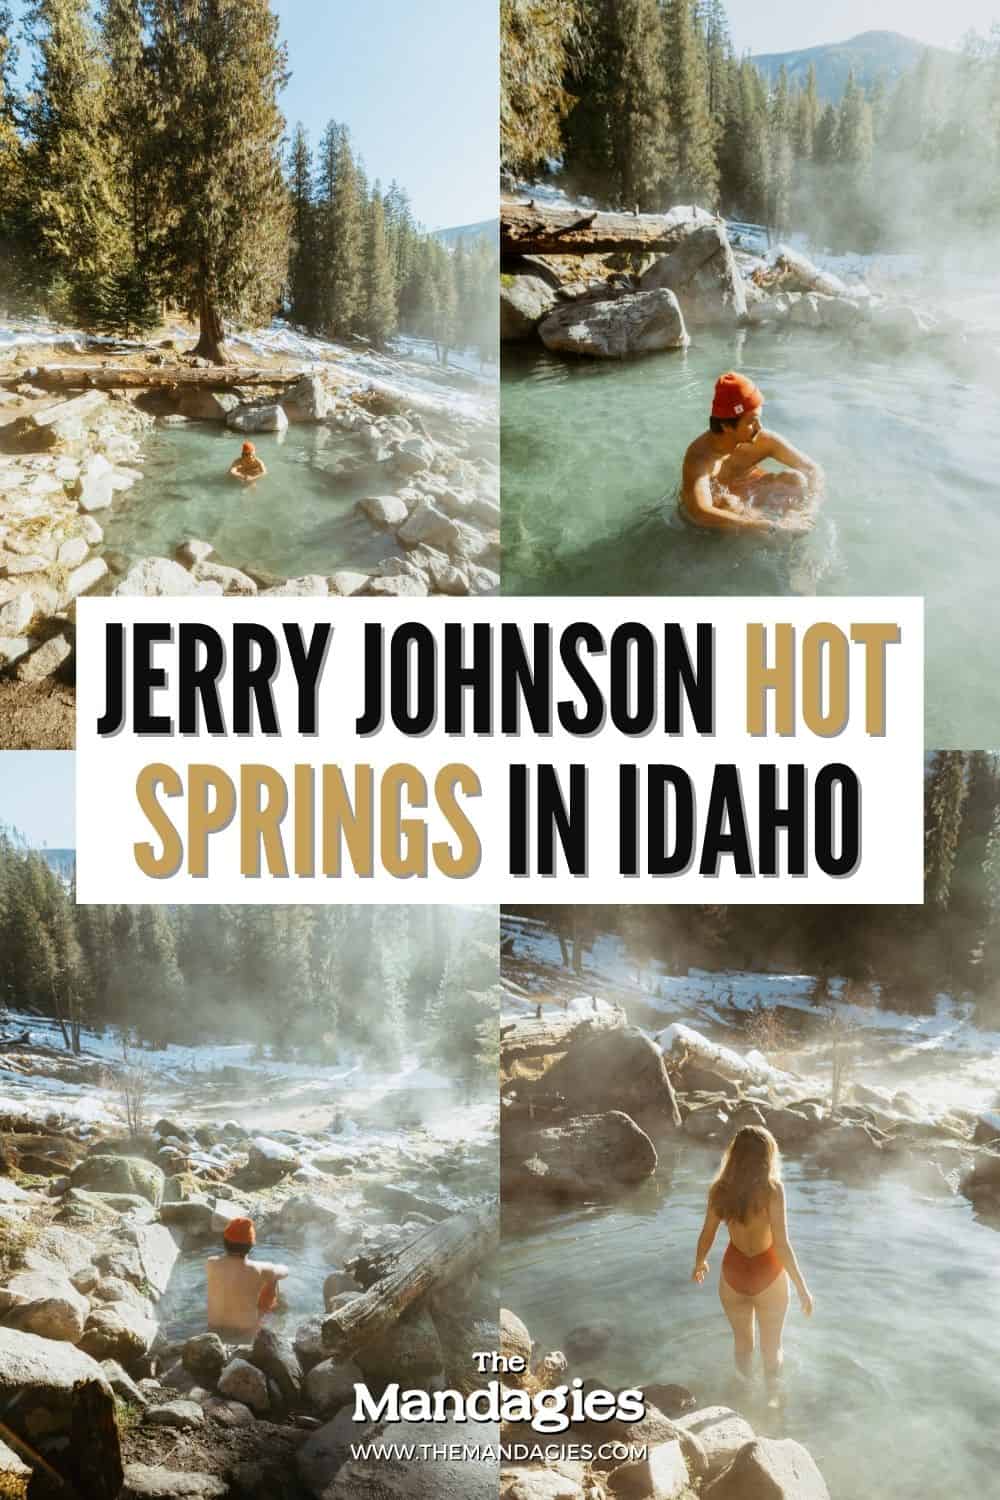 Jerry Johnson Hot Springs in Central Idaho is one of the coolest hot springs in Idaho! We're sharing how to get to the Lolo Pass area, what to pack for your hot springs day hike, and nearby hot springs near Missoula and North Idaho. Save this post for your next beautiful Idaho road trip! #westcoast #roadtrip #americanroadtrip #idaho #PNW #hotsprings #idahohotsprings #mountains #lolopass #missoula